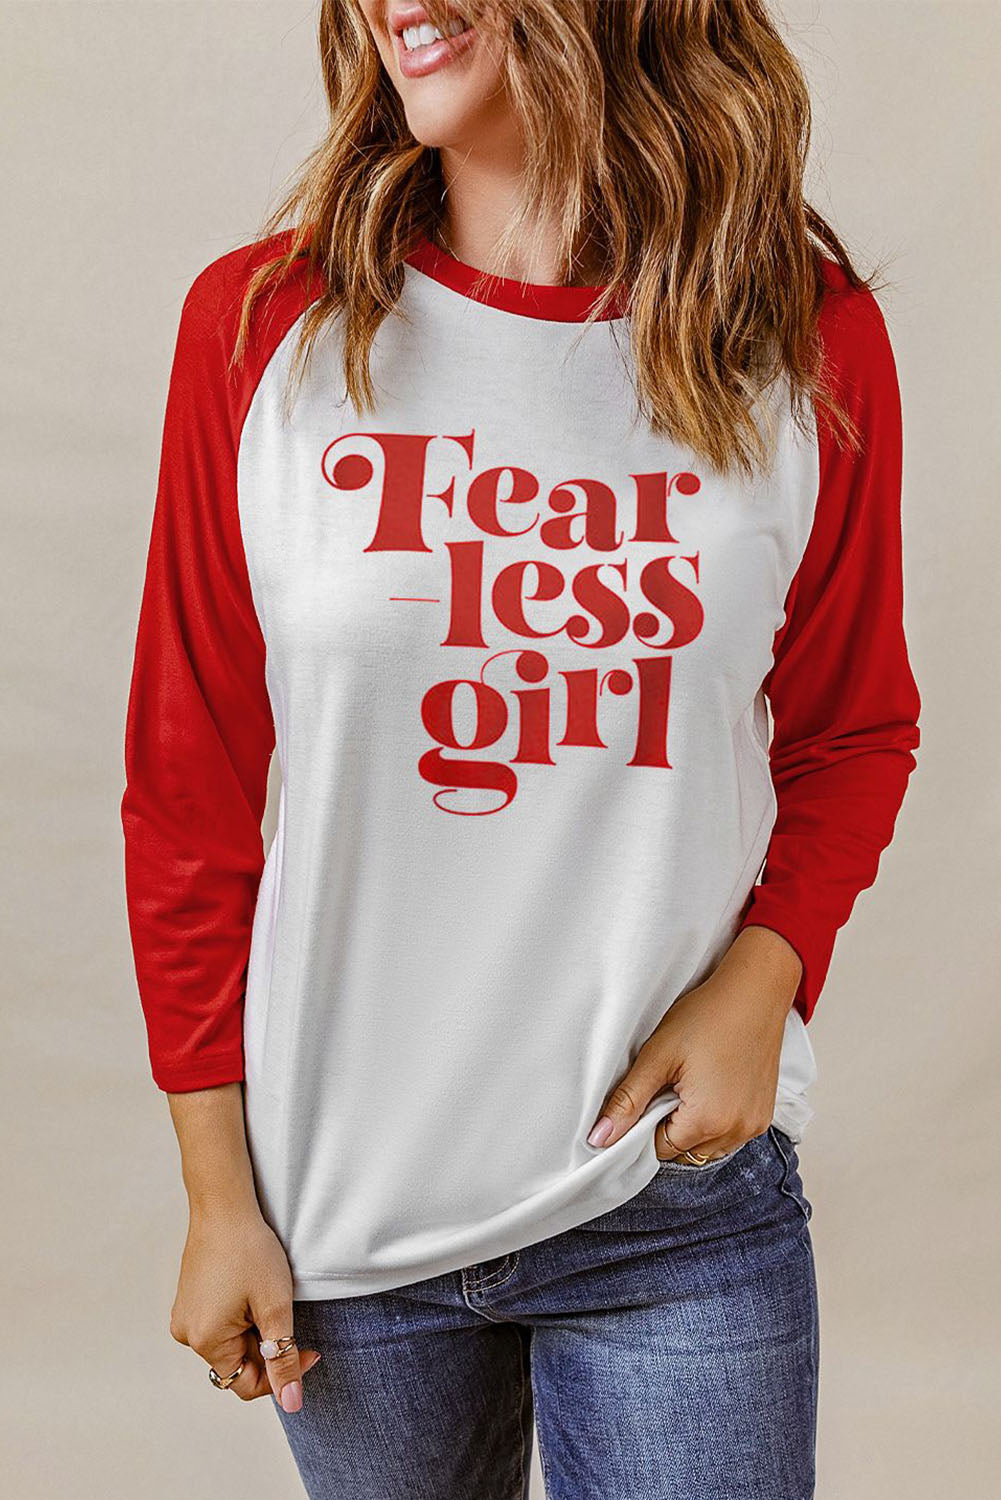 FEARLESS GIRL Graphic Raglan Sleeve Top - Coco and lulu boutique 